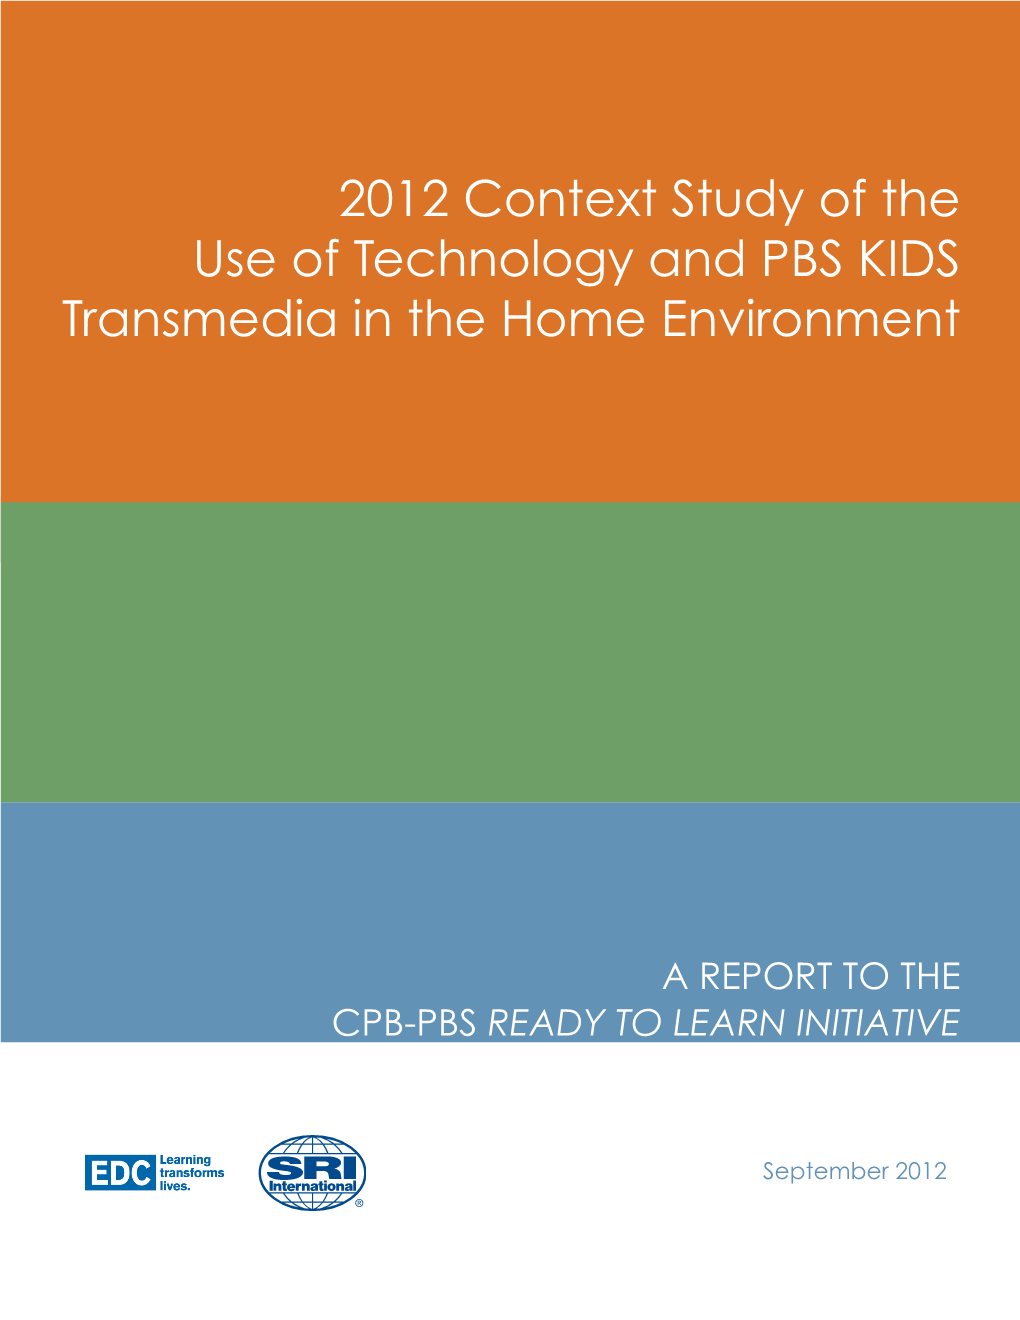 2012 Context Study of the Use of Technology and PBS KIDS Transmedia in the Home Environment